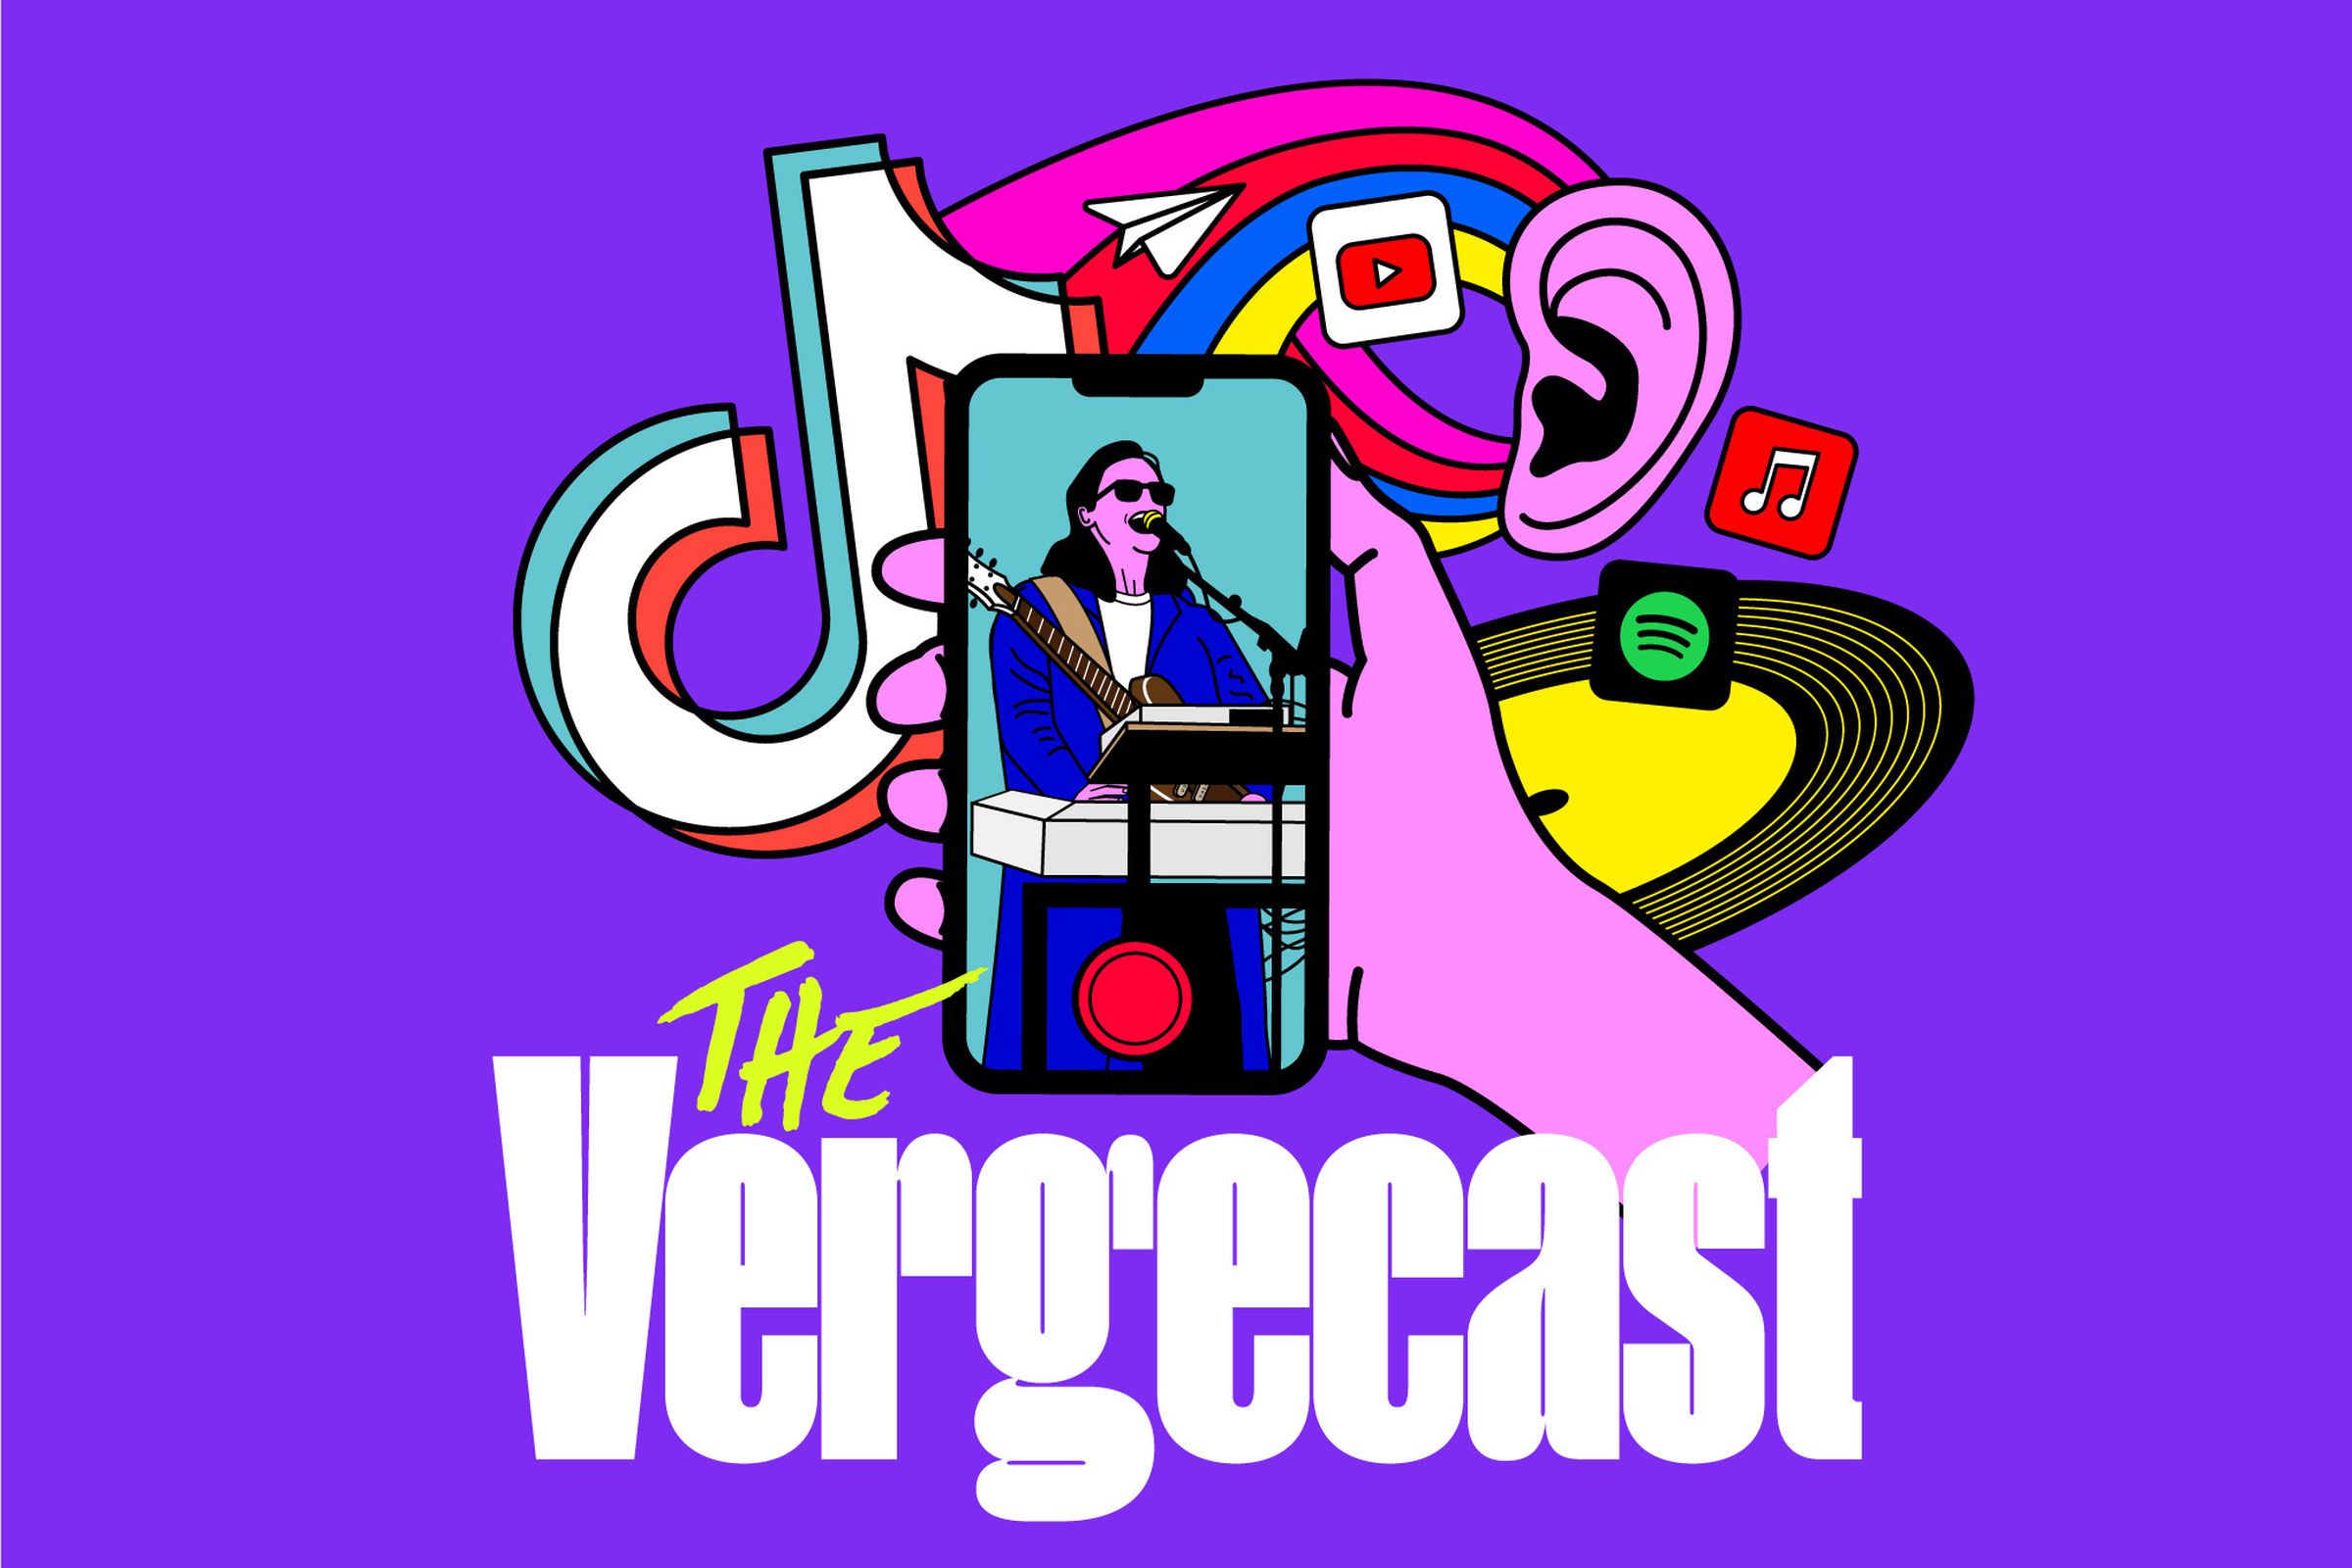 The Vergecast logo with a hand holding a phone. Logos of music platforms in the background